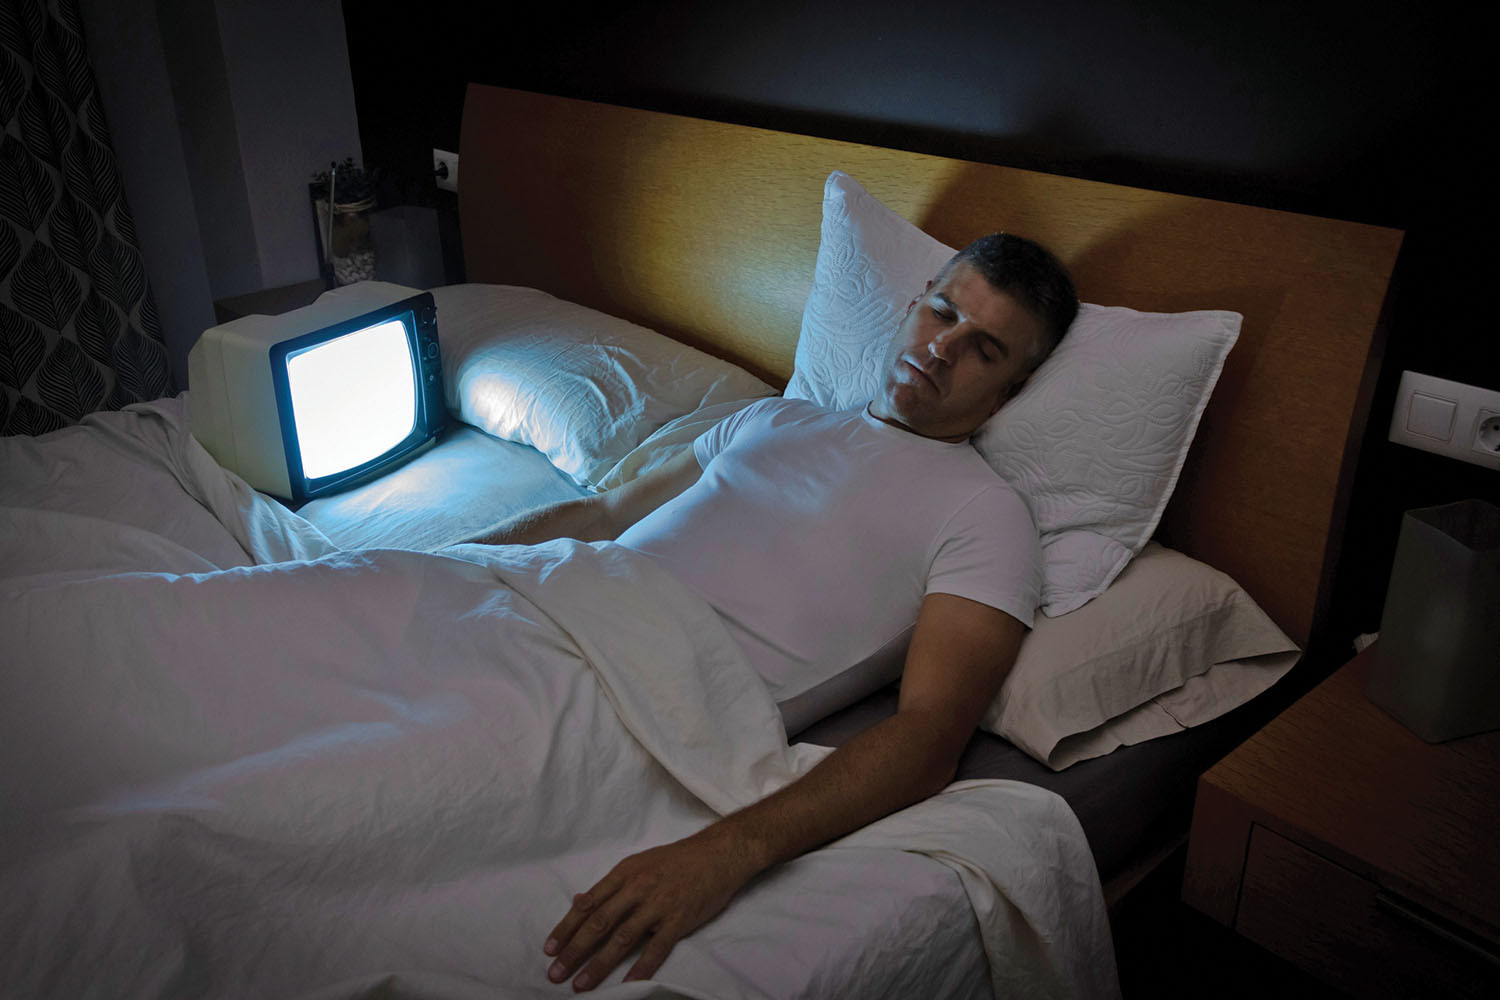 photo of a man asleep in bed with a small TV positioned next to him, throwing light on him